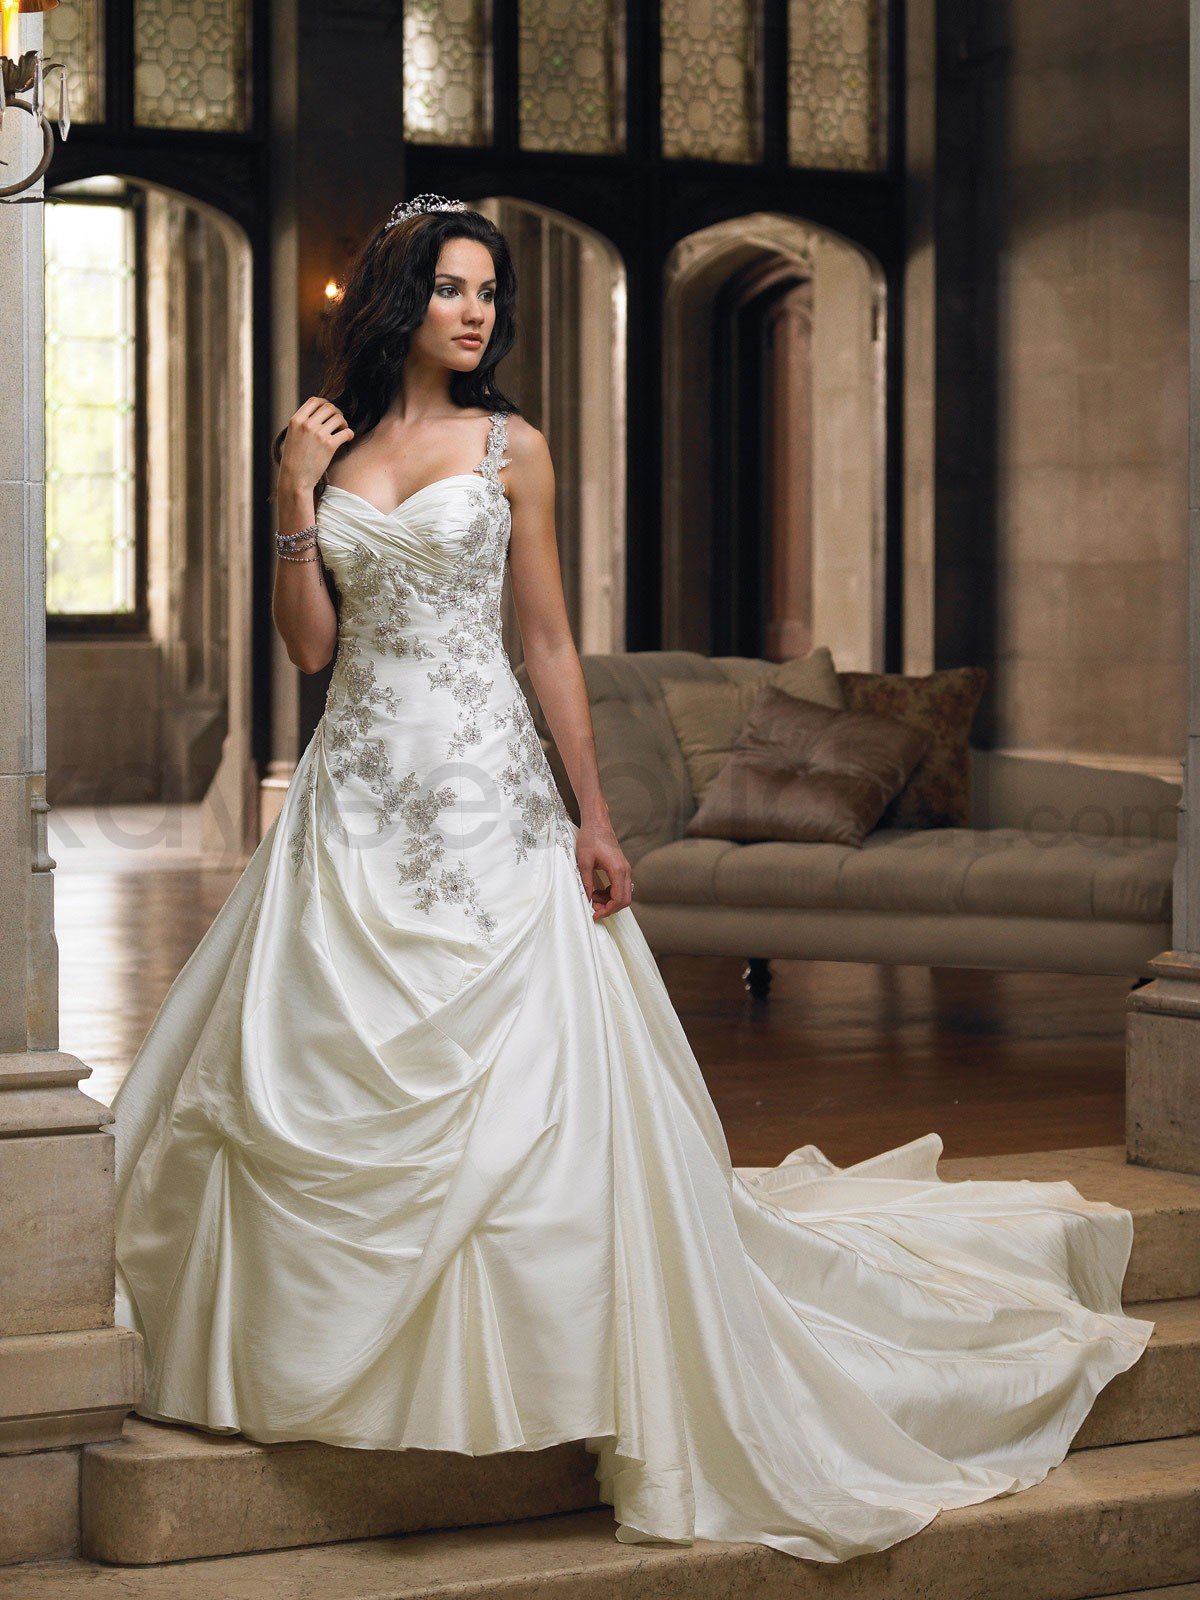 The Irresistible Attraction Of Ball Gown Wedding Dresses 4161